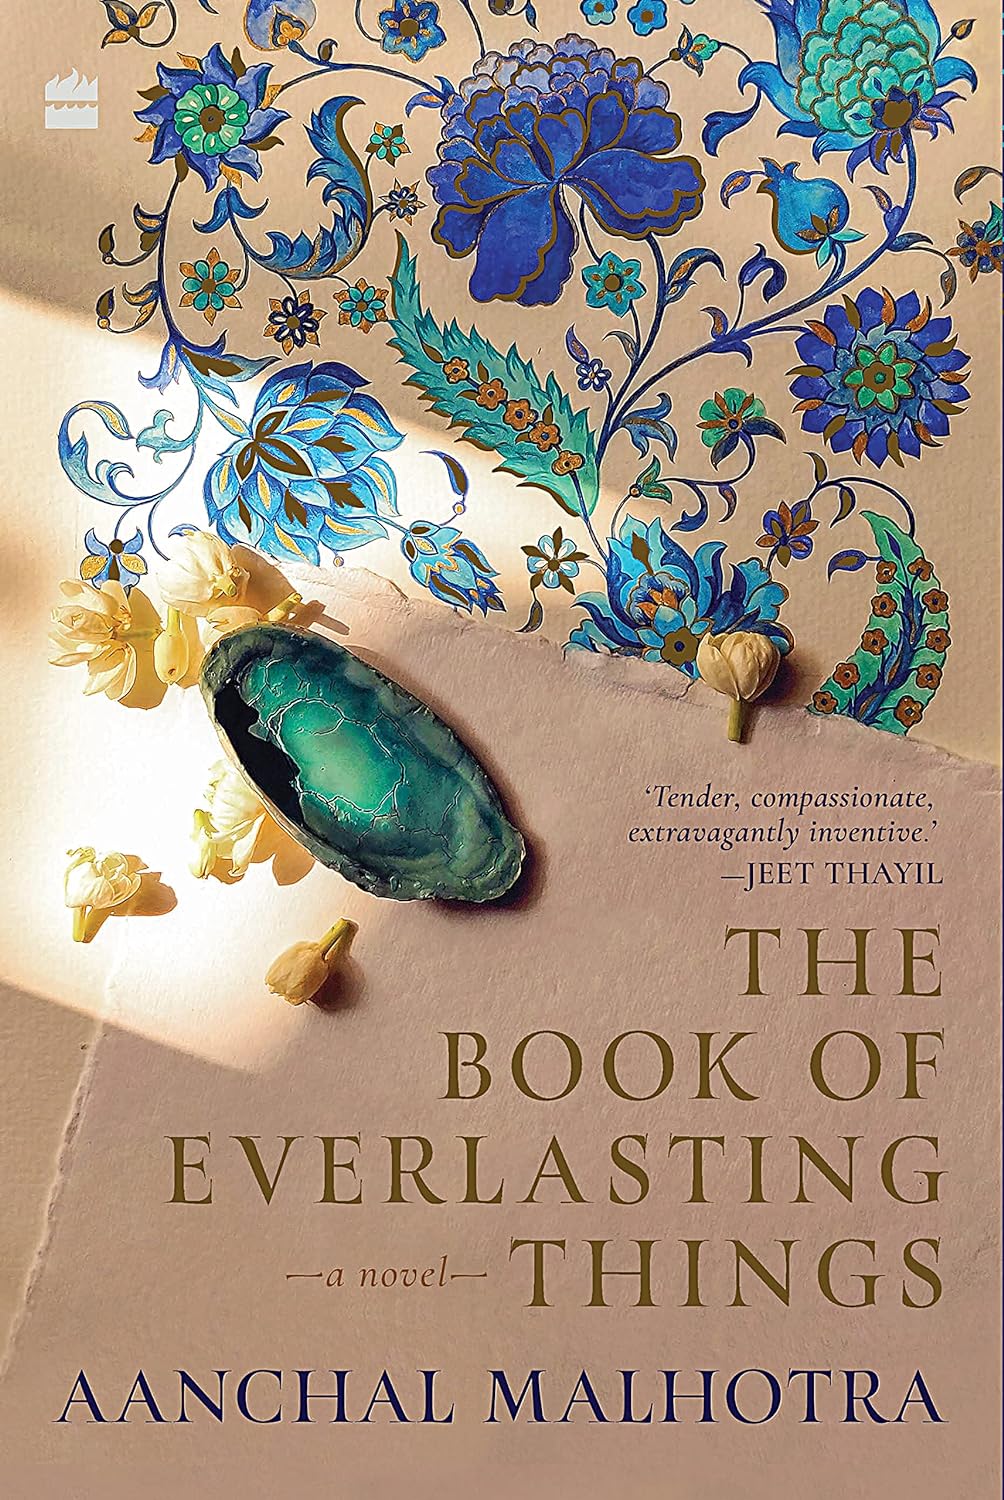 The Book of Everlasting Things Novel by Aanchal Malhotra